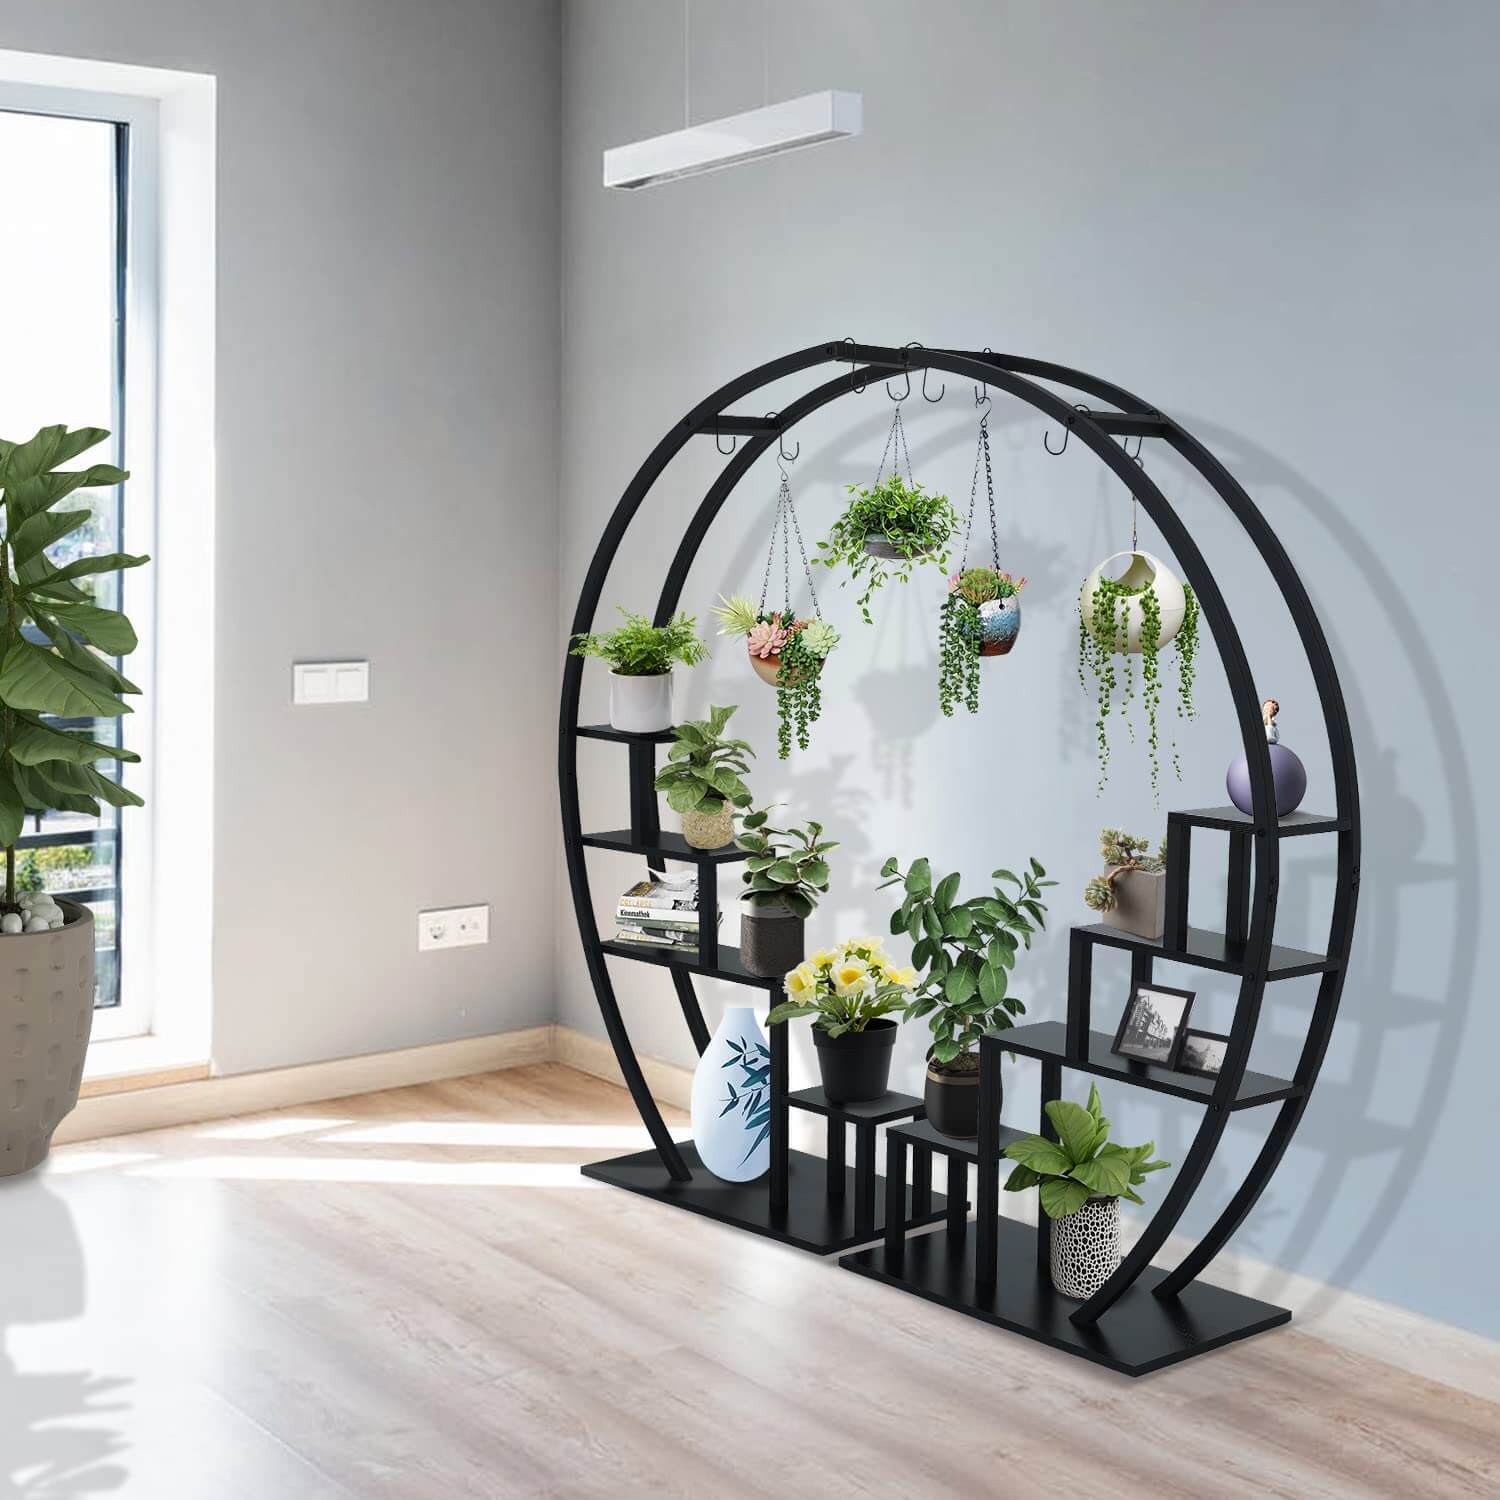 Black Plant Stand Indoor, 5 Tier Half Circle Ladder Flower Pot Stand GD003 is perfect for livingroom